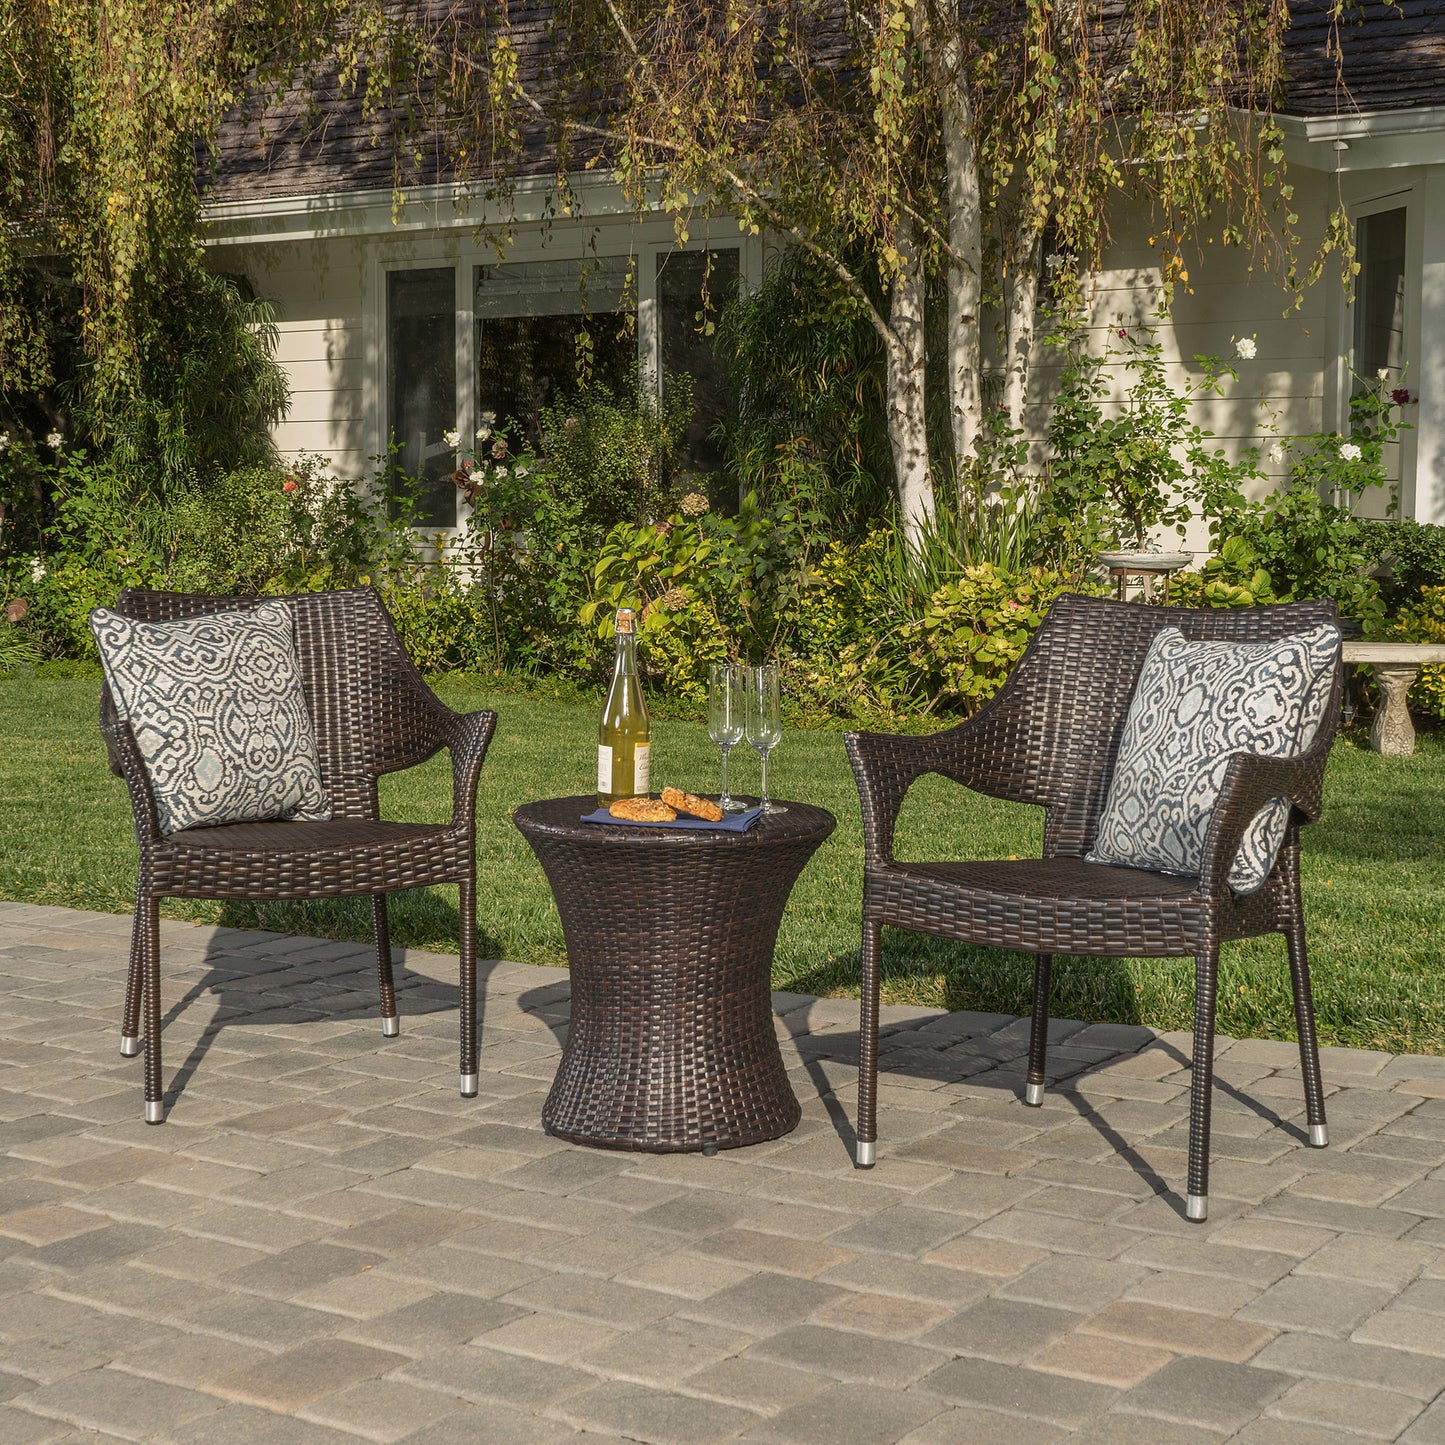 Tahitian Outdoor 3 Piece Multi-Brown Wicker Chat Set with Stacking Chairs